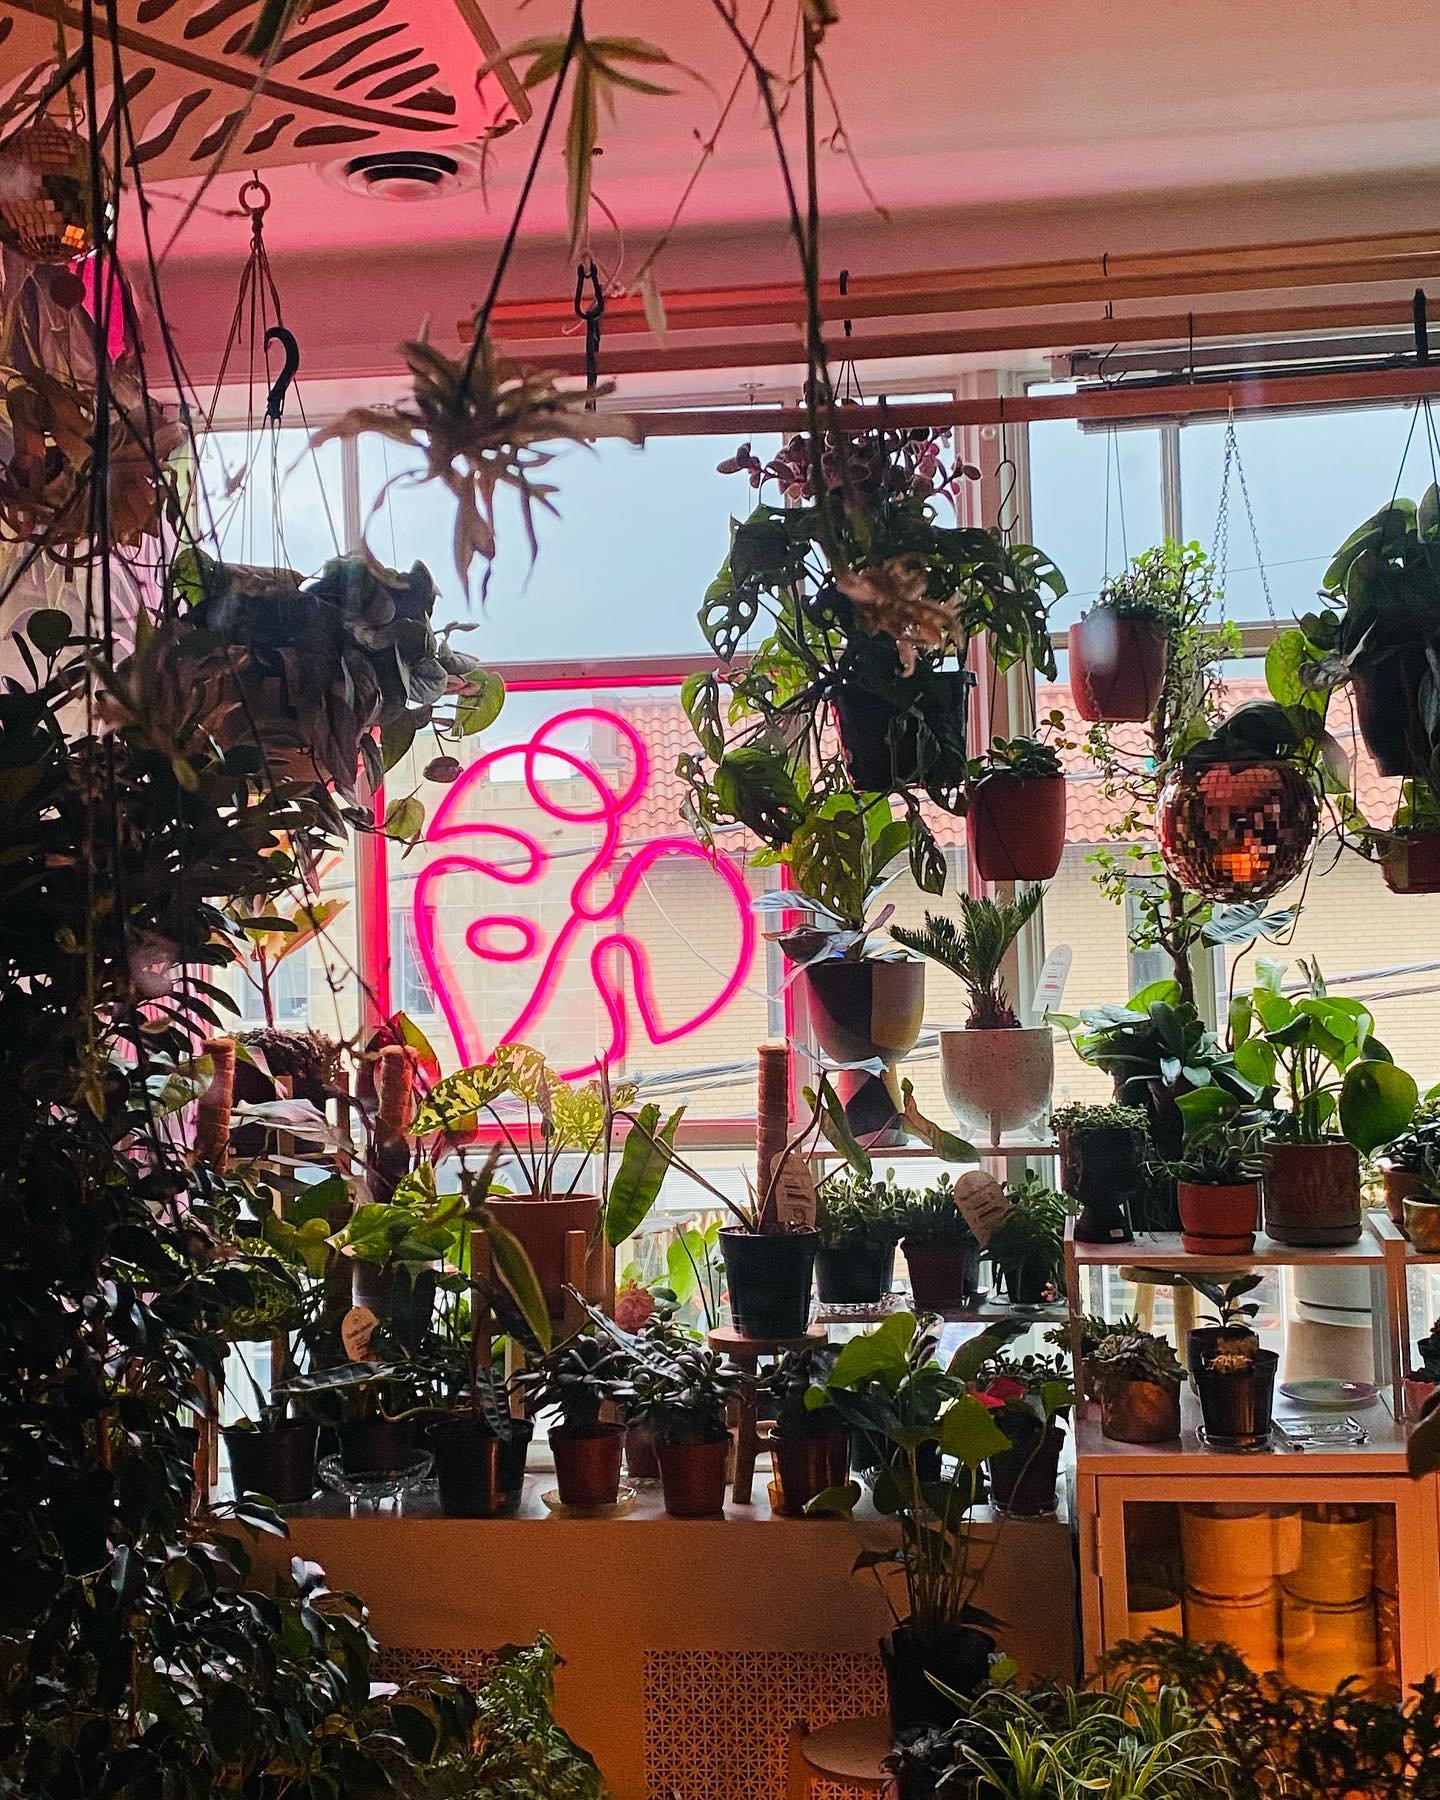 The OG. This room will always be  magic to me. 

Thank you for a fun rainy Sunday 💚 

#indigroplants #plantshop #tkpk #customneon #mainstreettakoma